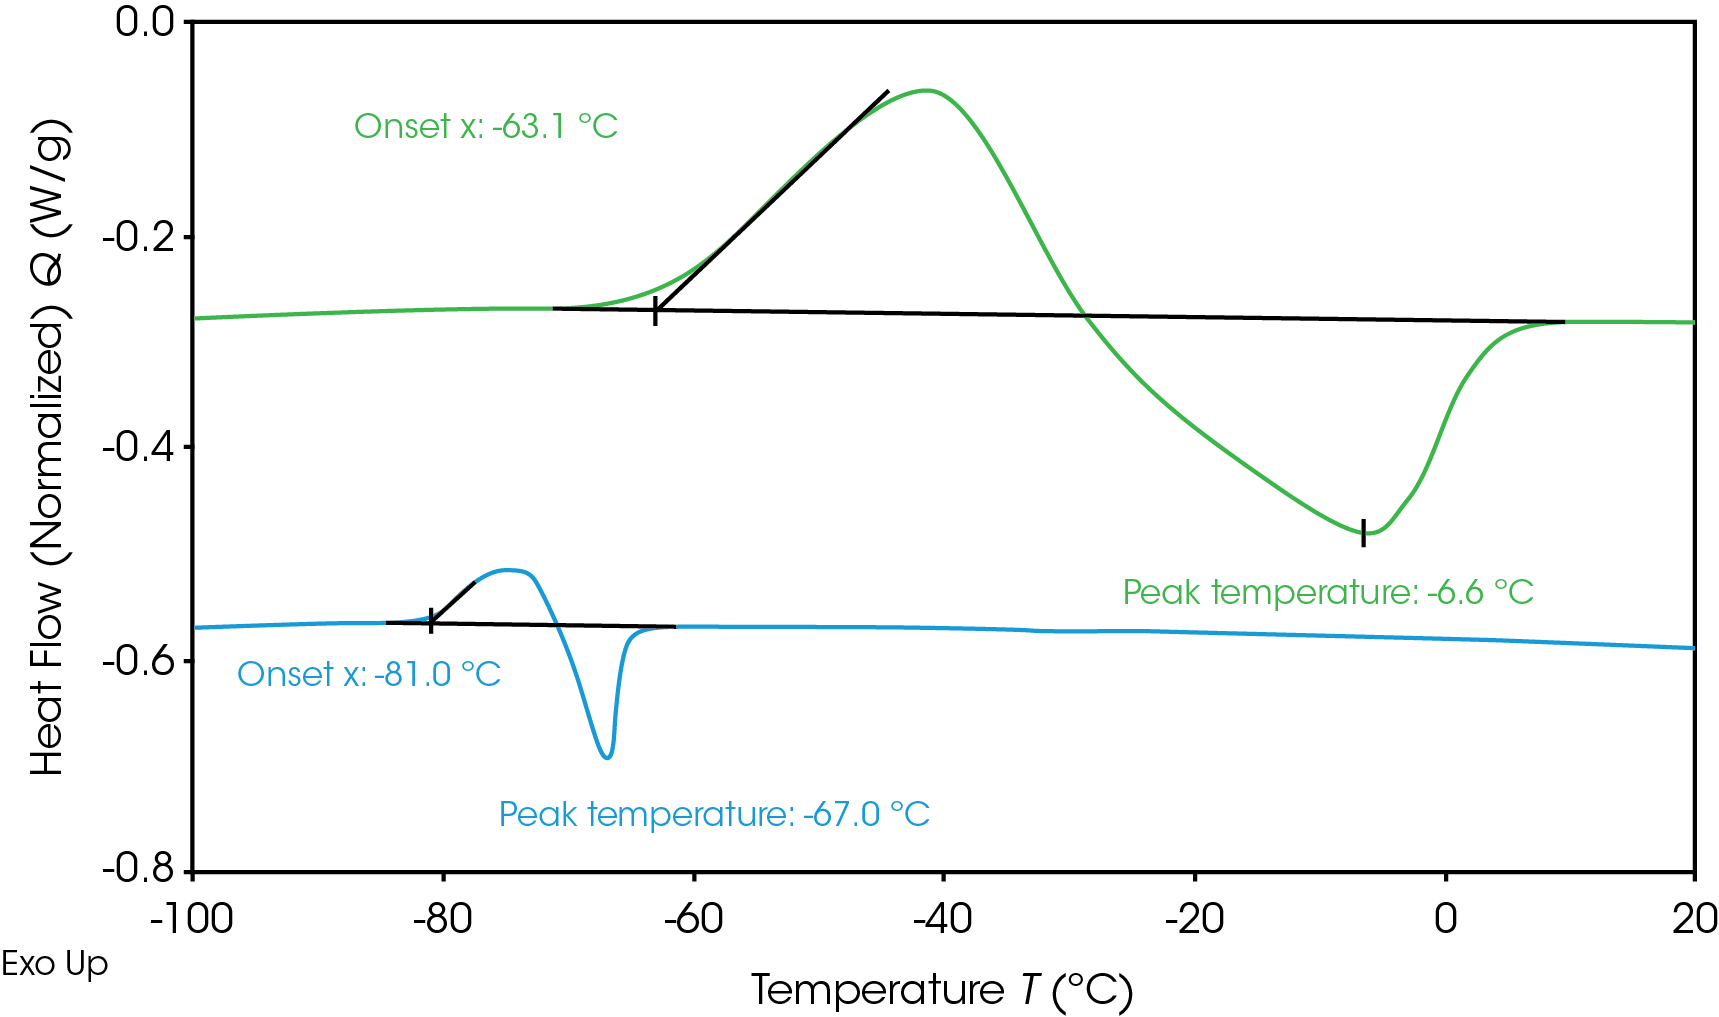 Figure 1. Comparison of Electrolytes A and B Phase Transition in subambient temperature